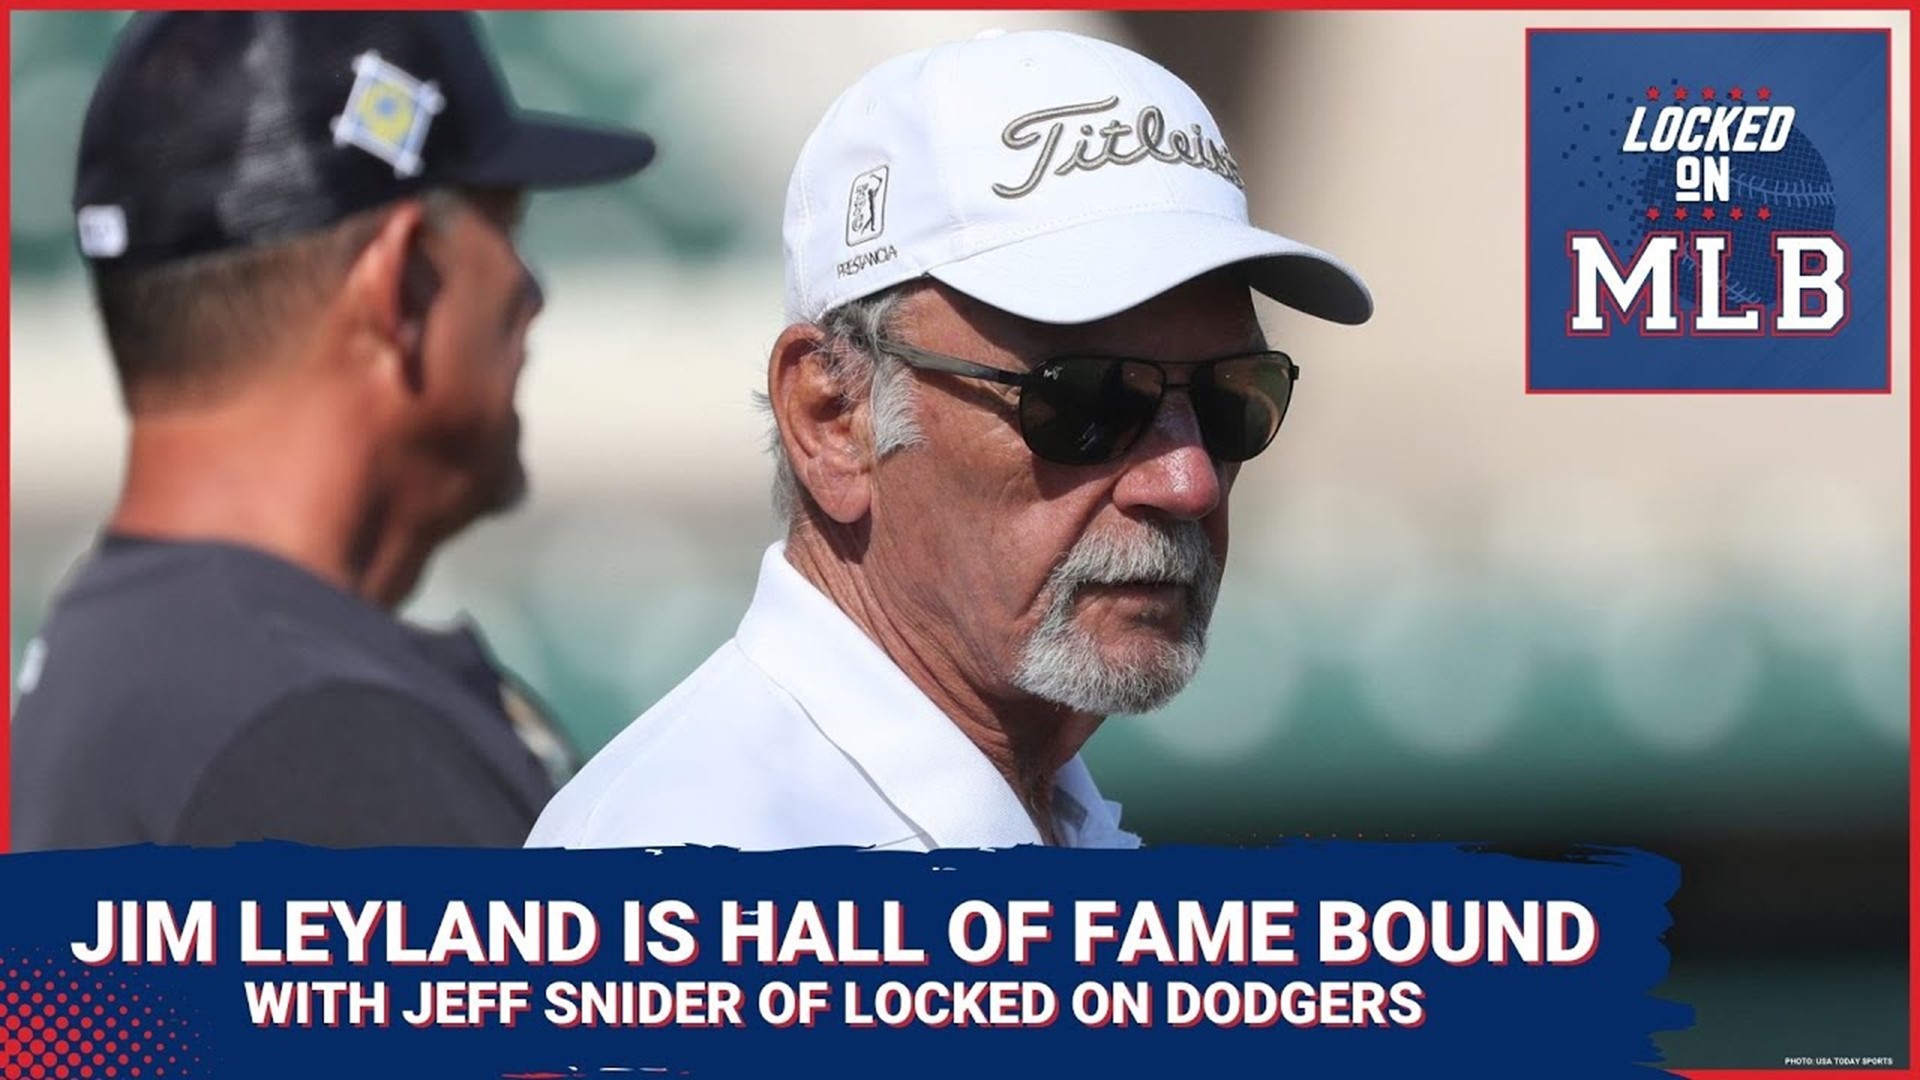 Gruff, no nonsense chain smoking Jim Leyland took the Pirates, Marlins and Tigers to the postseason. Now he is heading, deservedly so, to the baseball Hall of Fame.